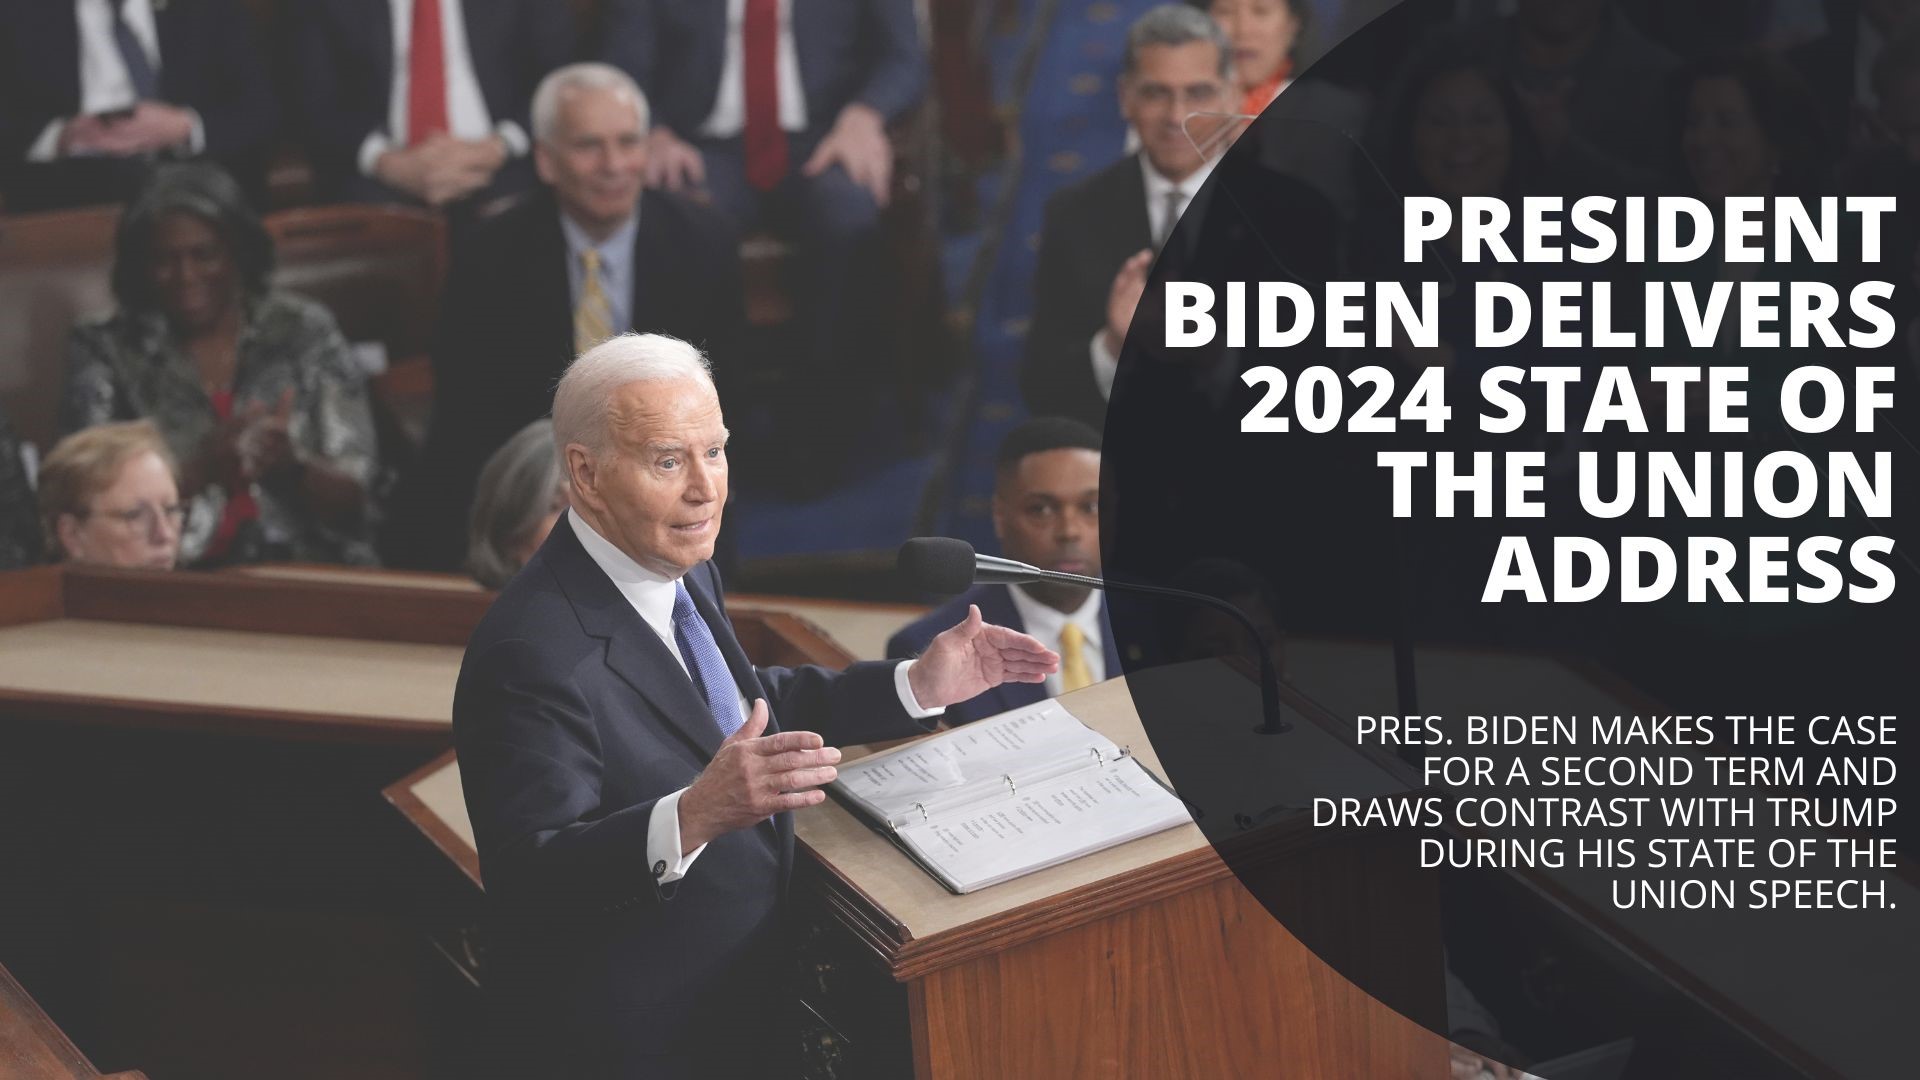 Pres. Biden makes the case for a second term and draws contrast with Trump during his 2024 State of the Union speech. Here is his address from March 7, 2024.